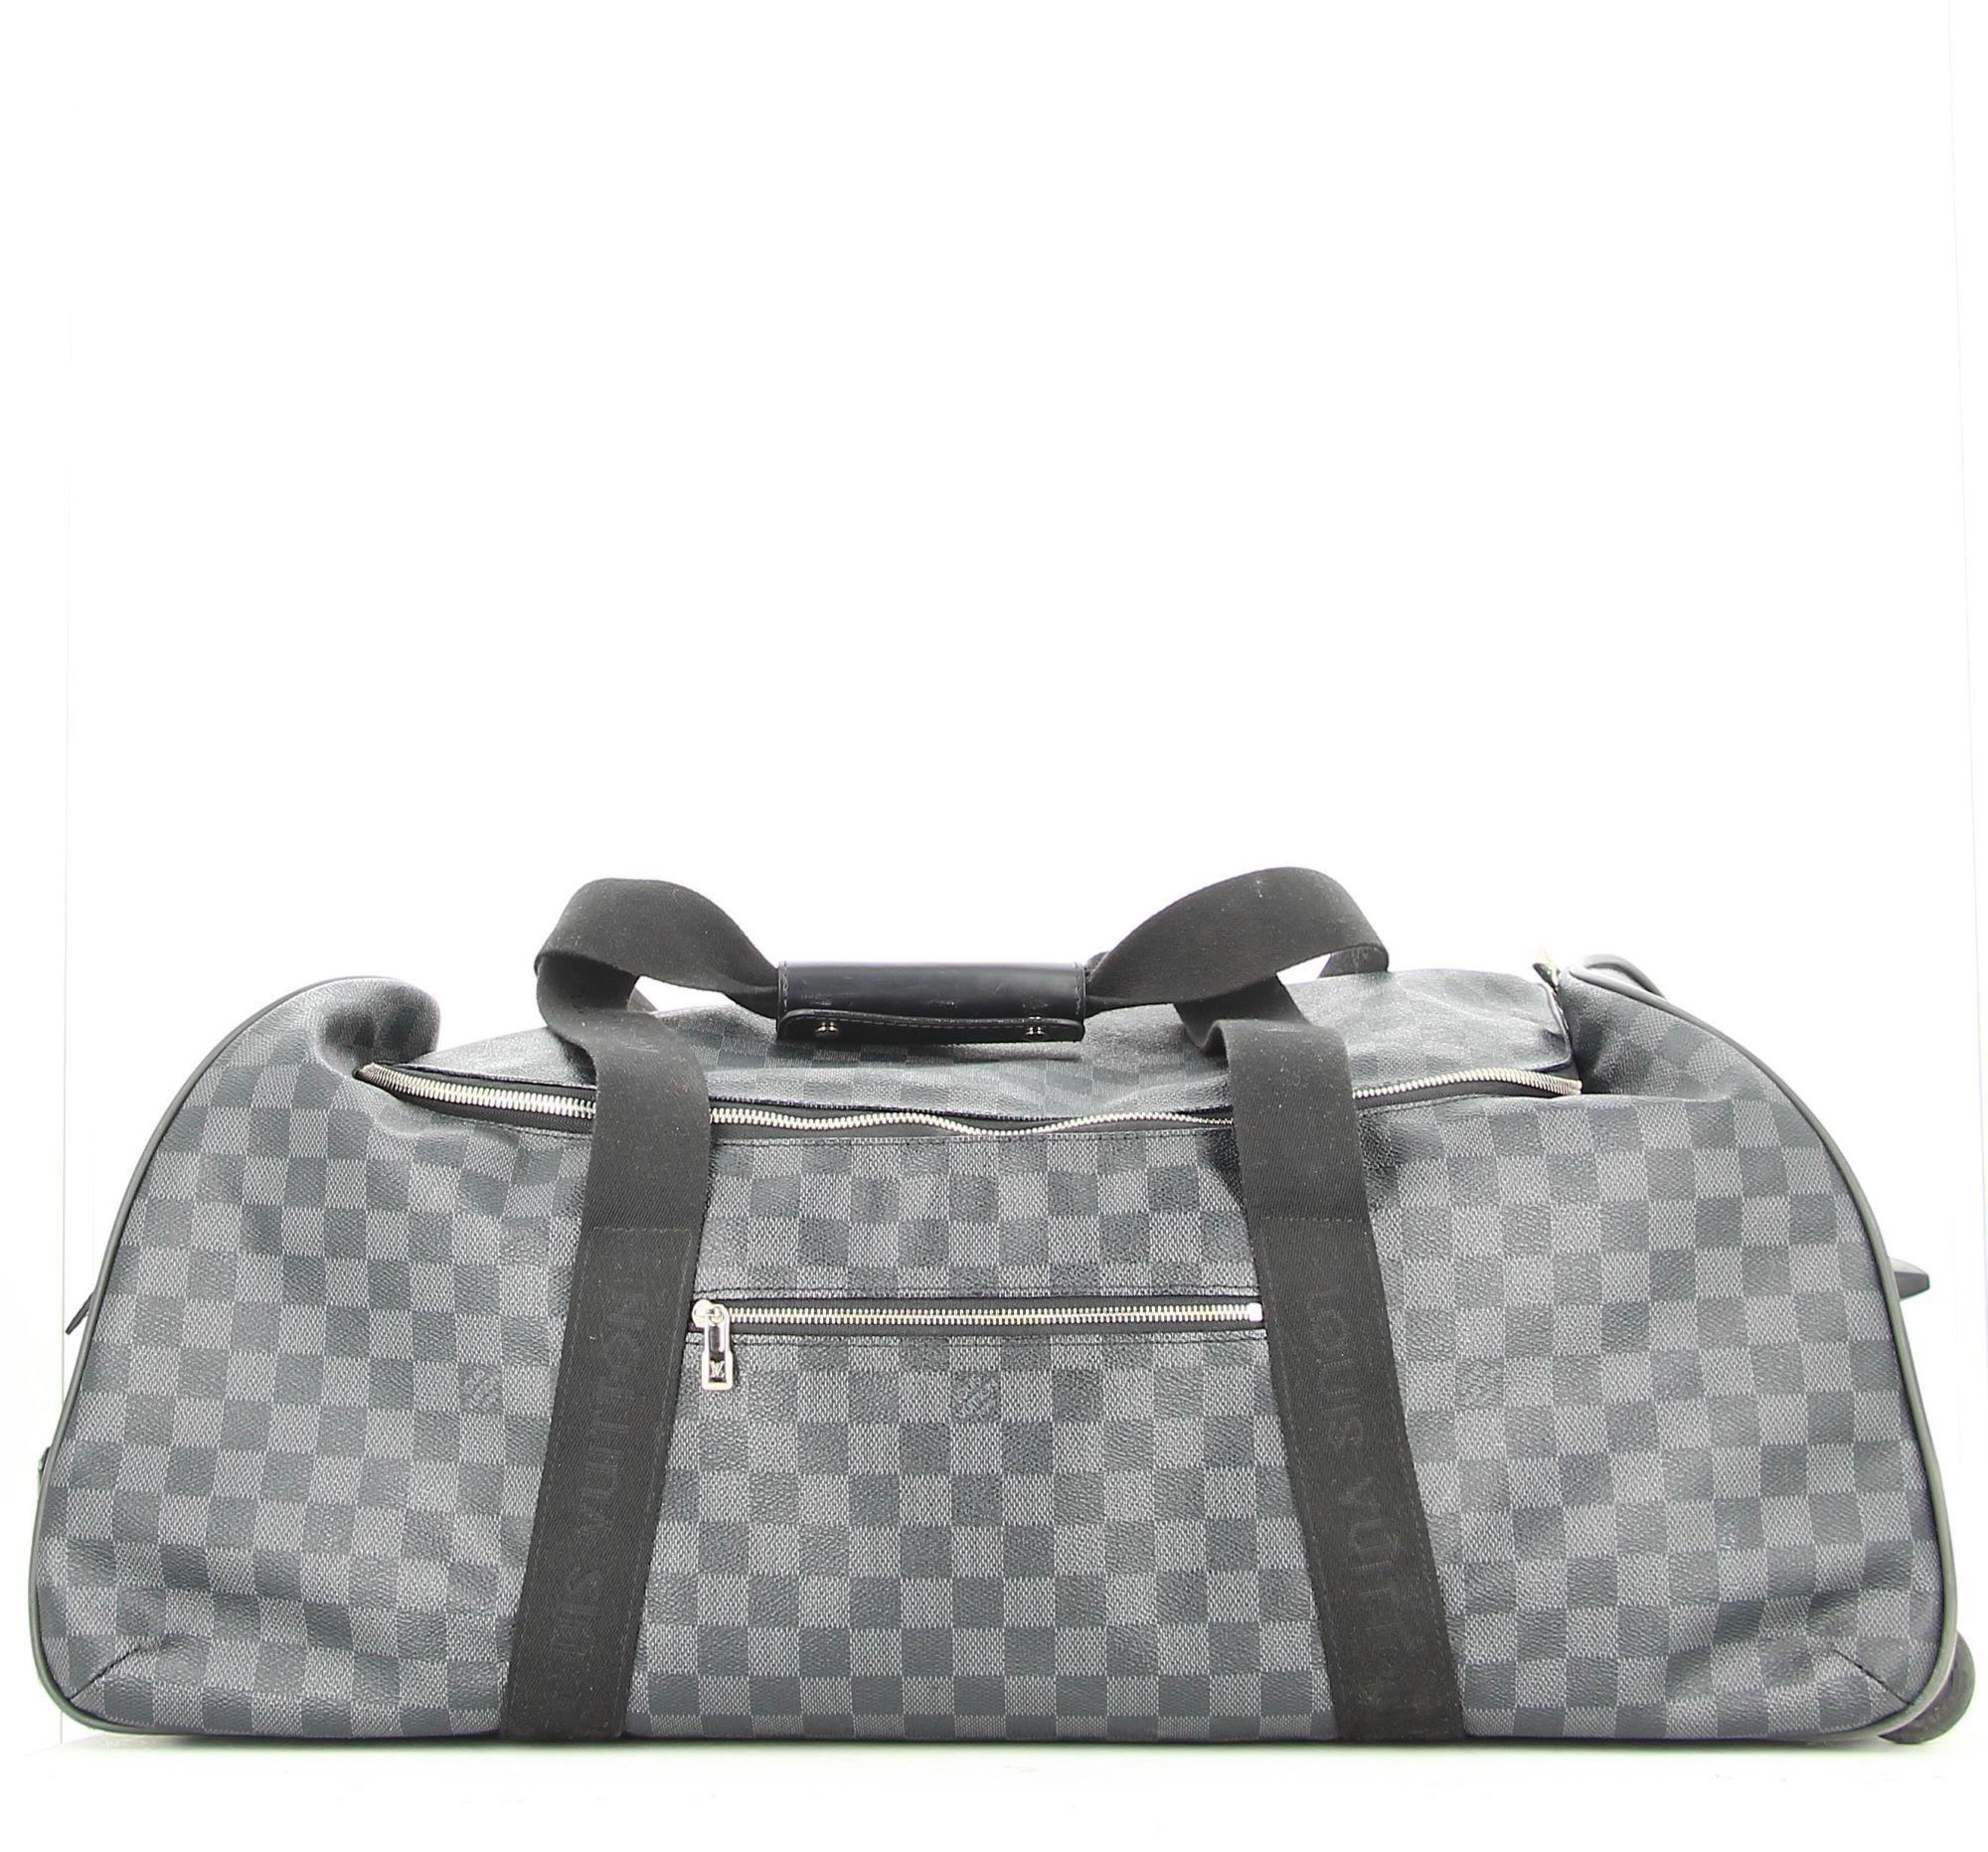 Louis Vuitton Black Graphite Damier Suitcase.
Louis Vuitton Graphite suitcase very good condition. Show some light signs of use and wear but nothing visible. What is more usefull than a suitcase ?
Louis Vuitton Damier travel case, may be carried by